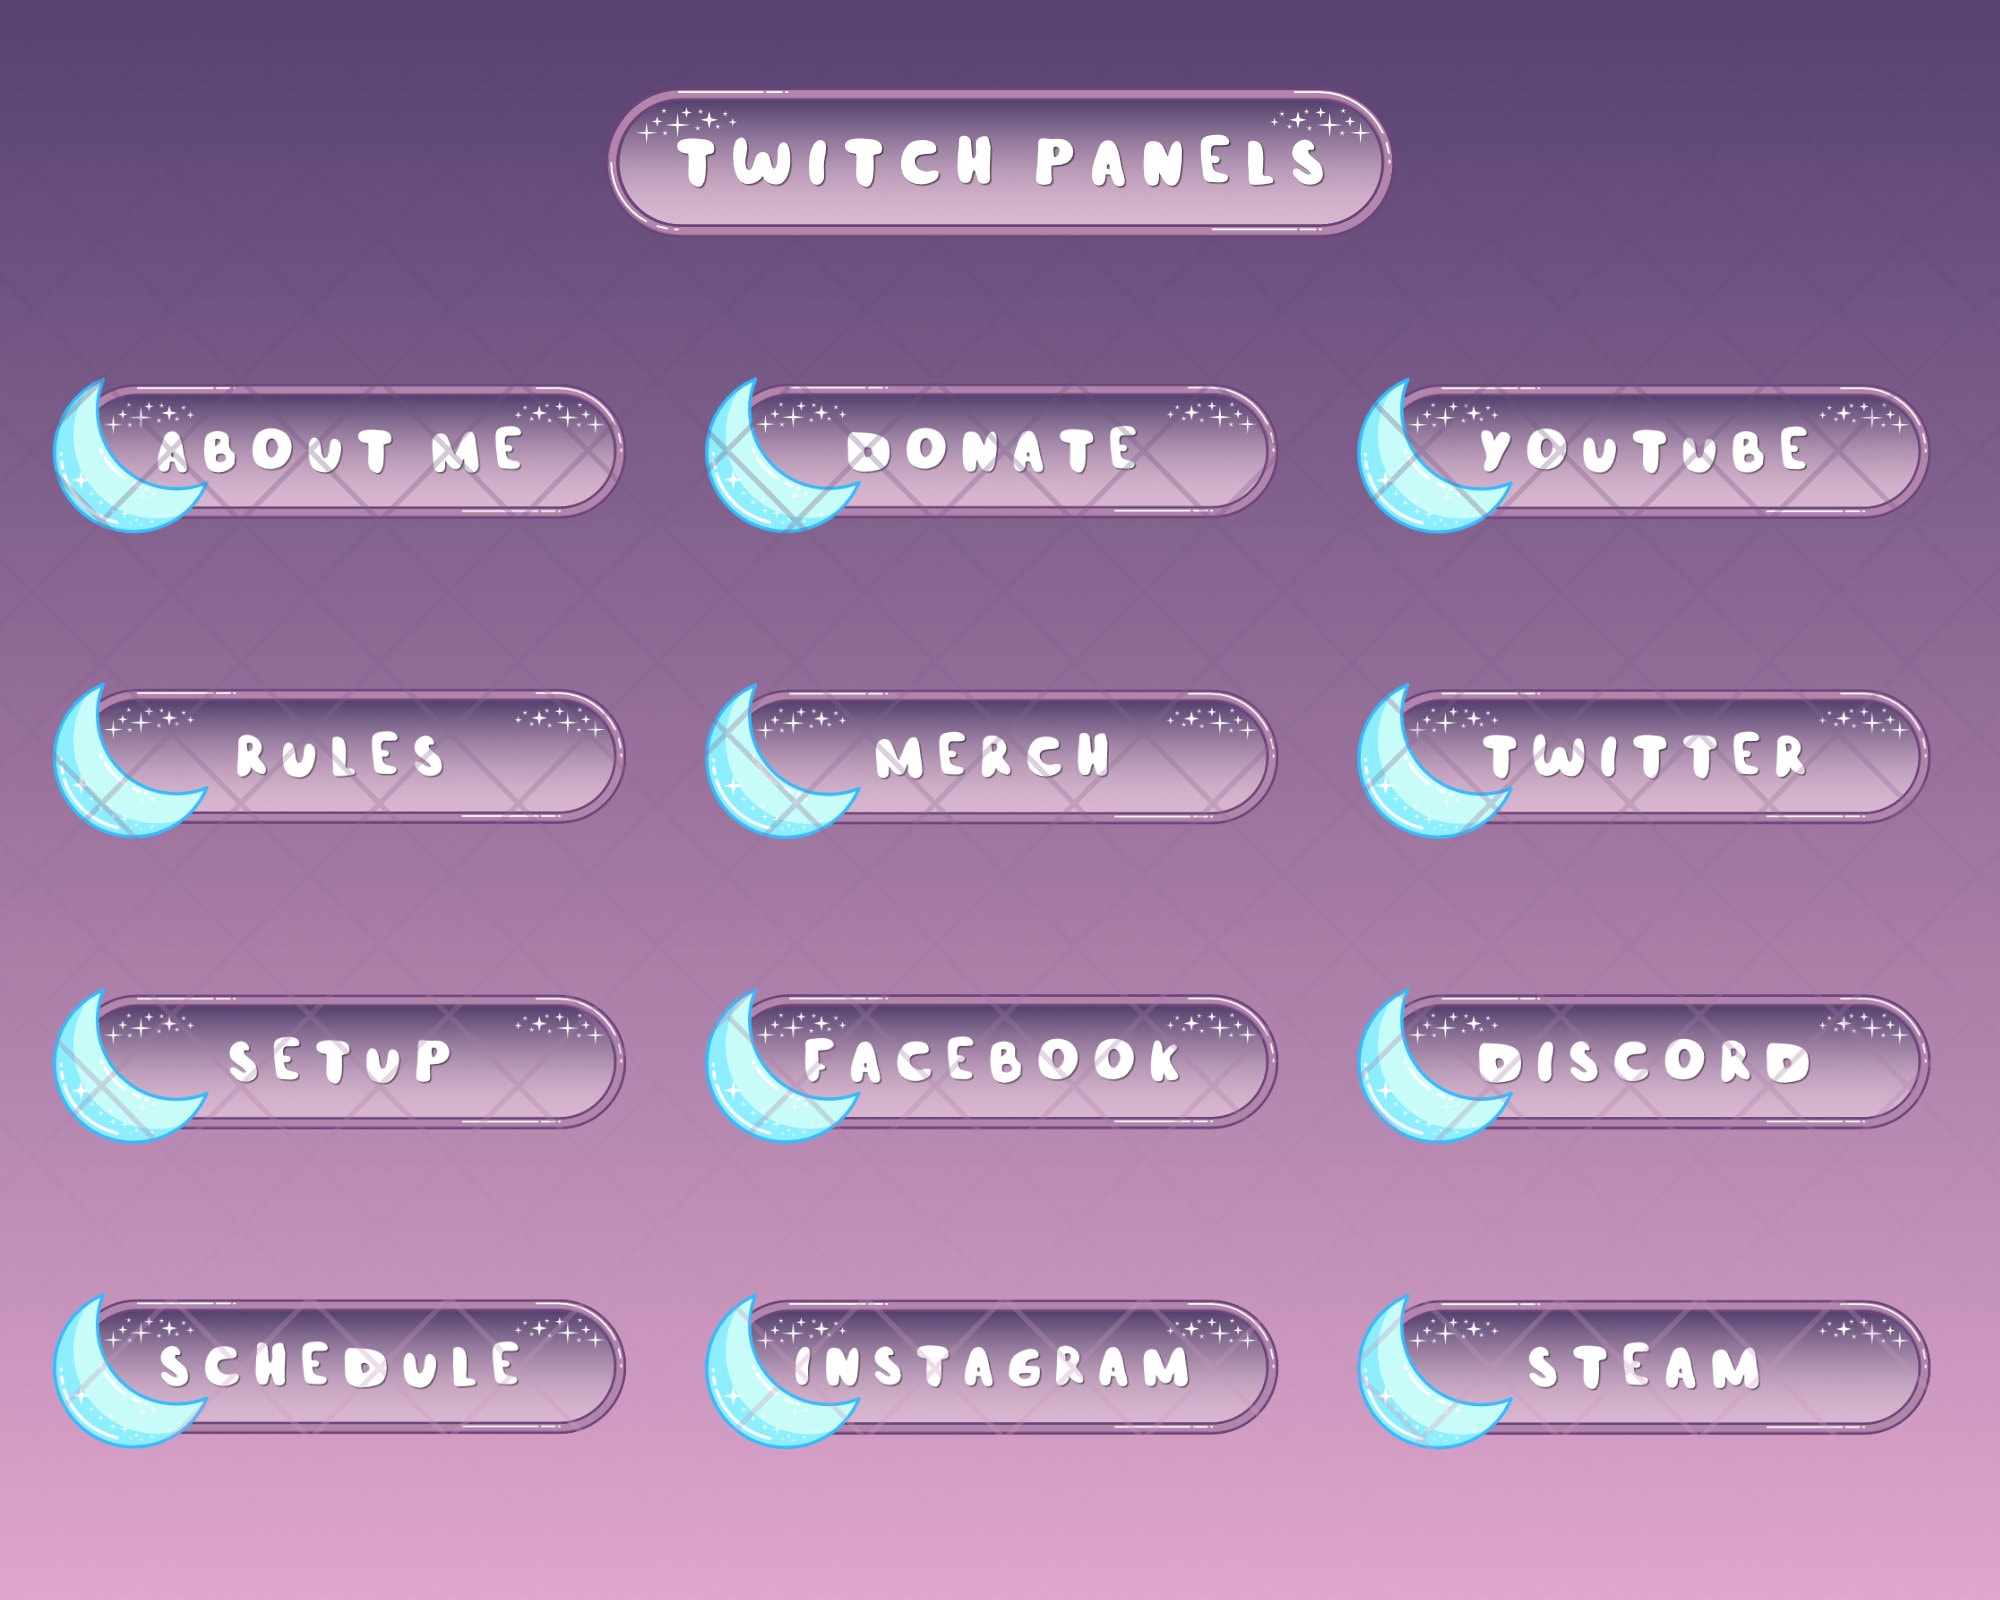 panels for twitch